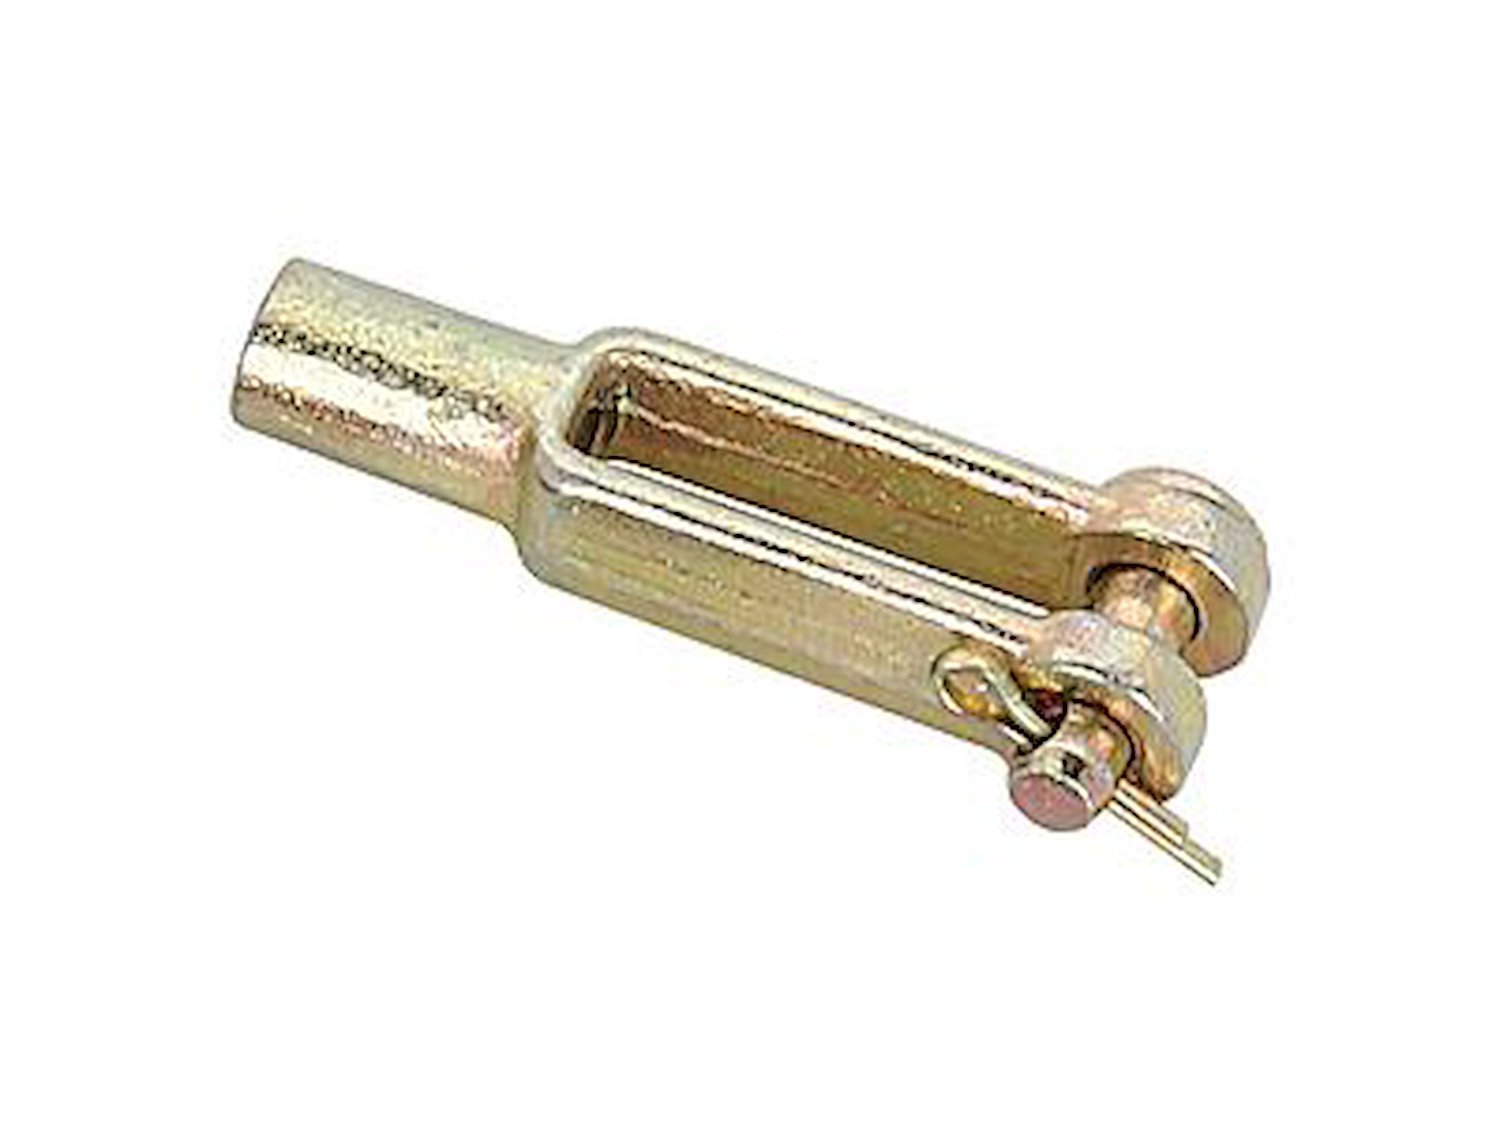 Clevis with Pin #10-32 Thread, 3/16" Pin